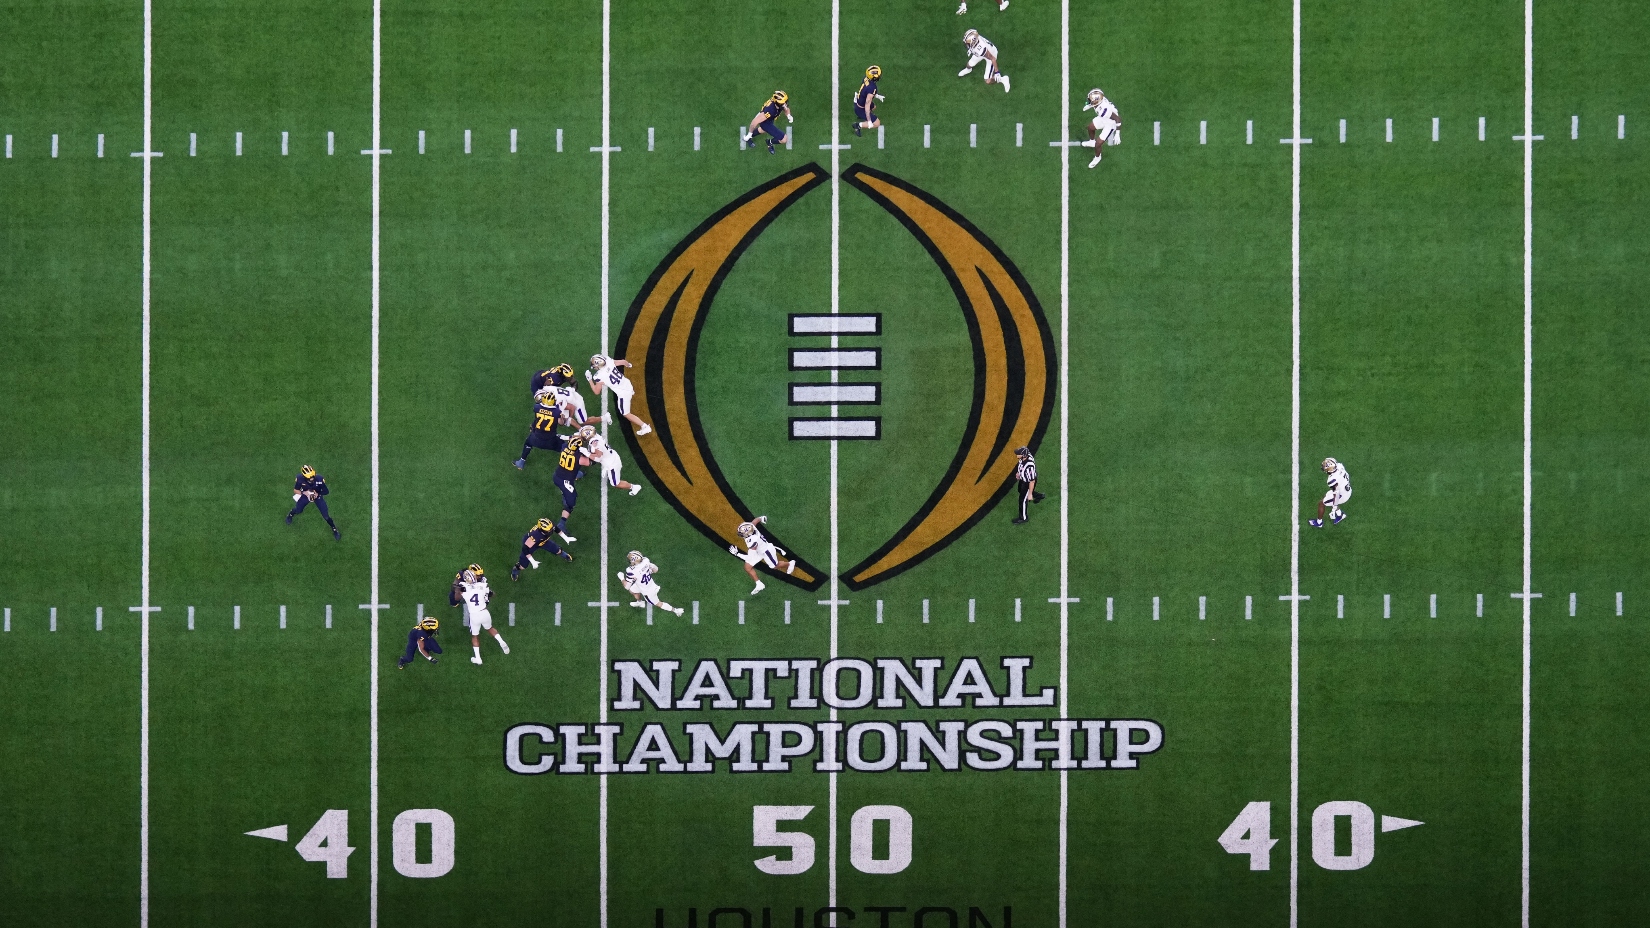 College Football National Championship overhead view